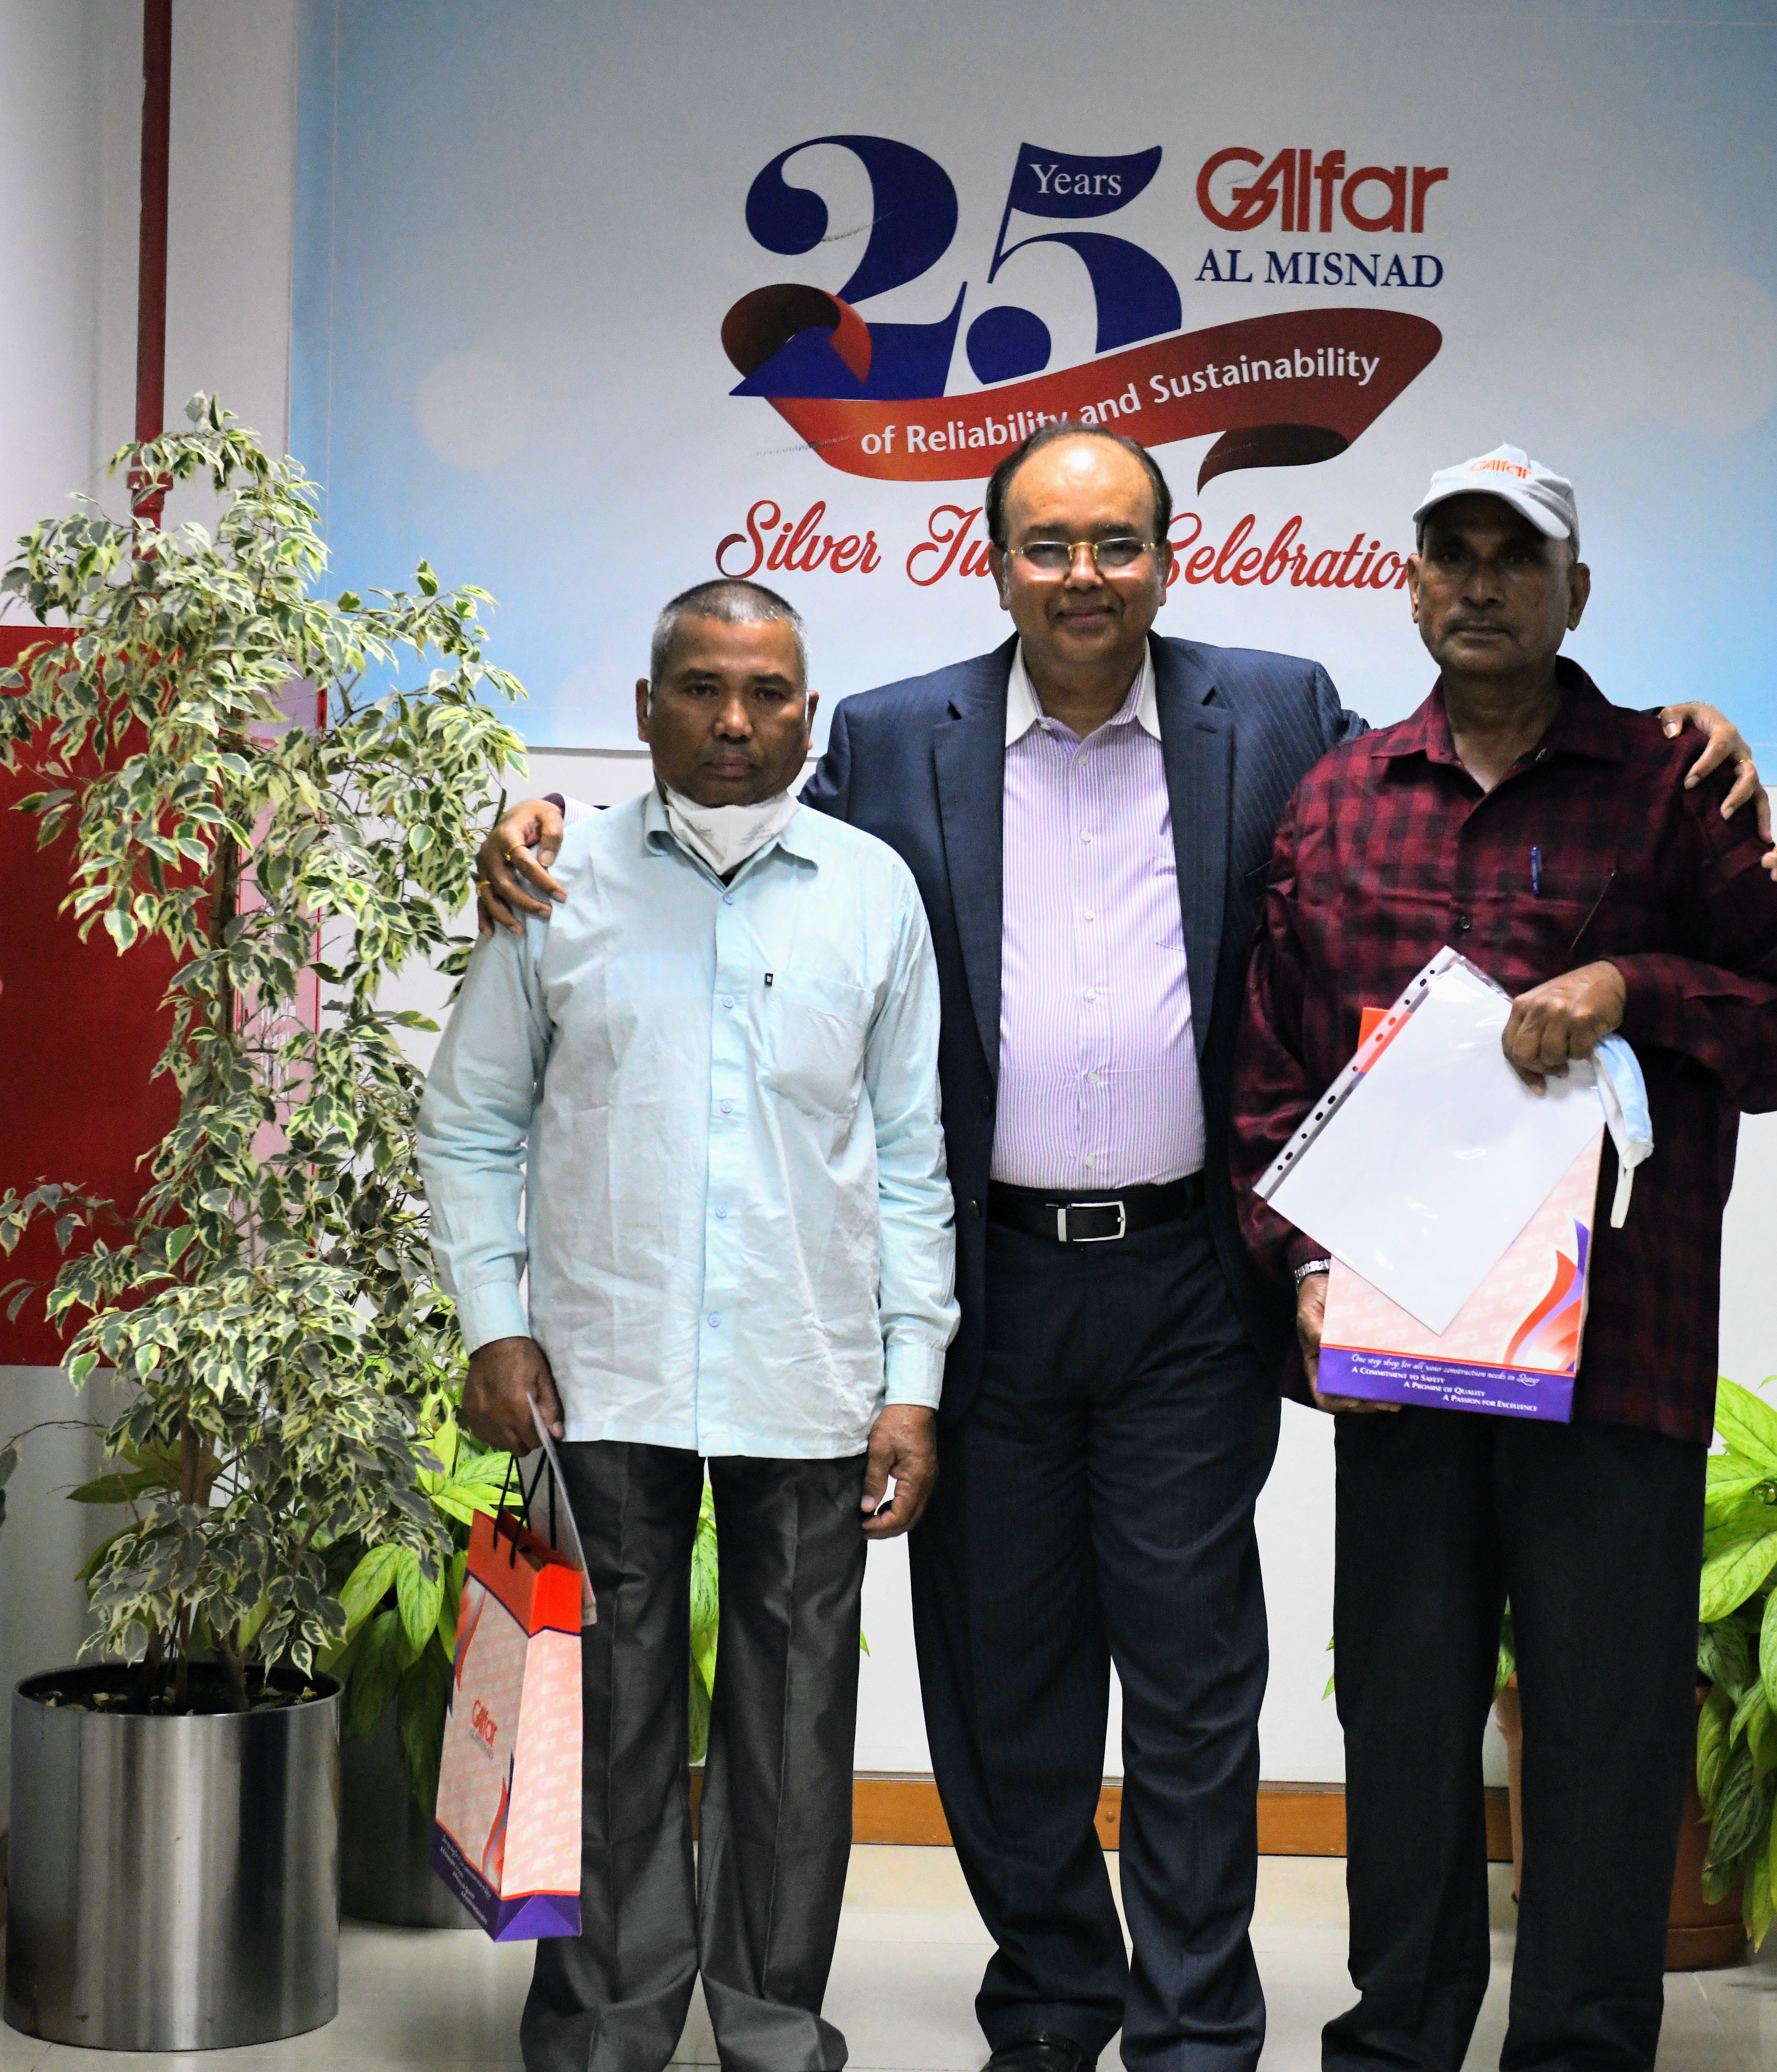 Galfar Al Misnad Felicitates Employees With 25 Years of Service